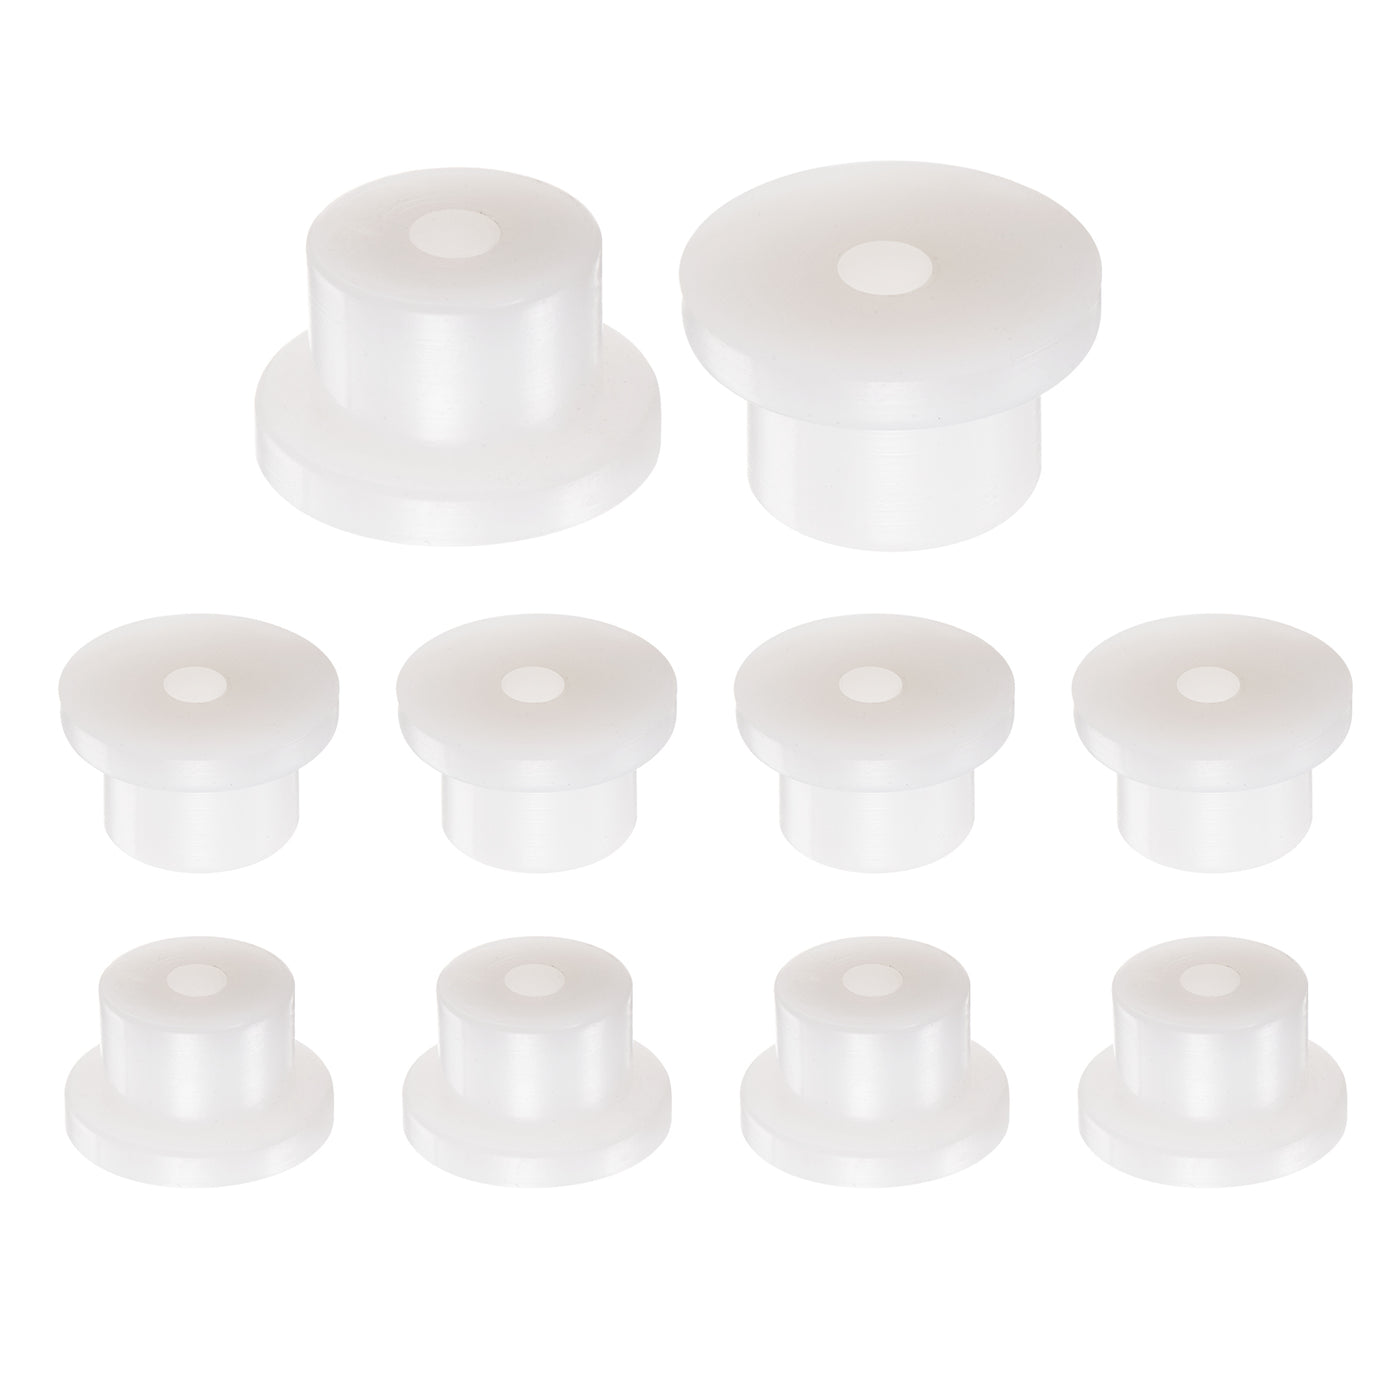 uxcell Uxcell 10pcs Flanged Sleeve Bearings 8mm ID 25.5mm OD 20mm Length Nylon Bushings, White